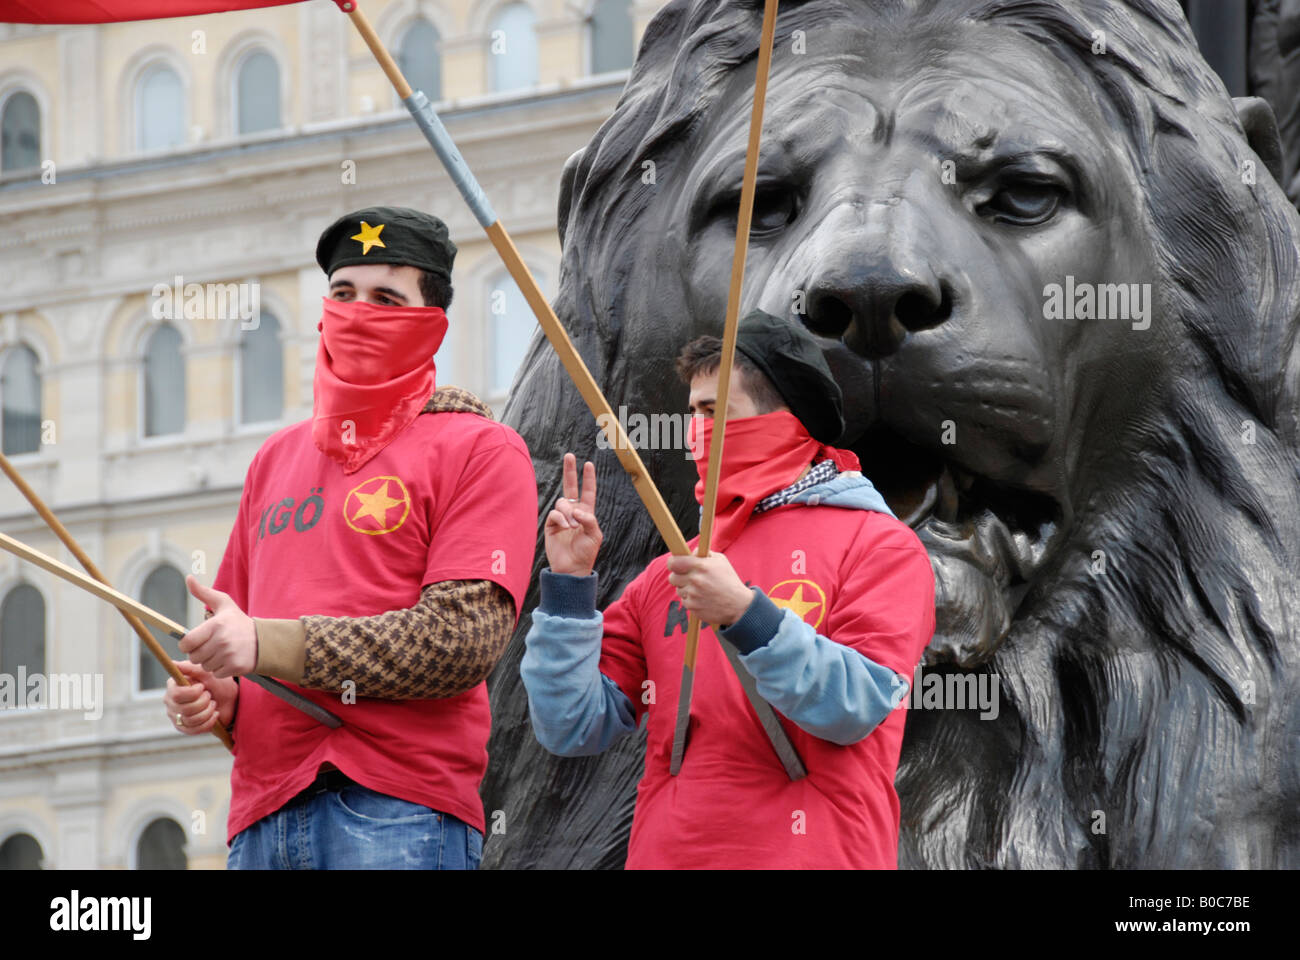 Two MLKP Turkish Marxist Leninist Communist Party members dressed in red standing under lions in Trafalgar Square Stock Photo